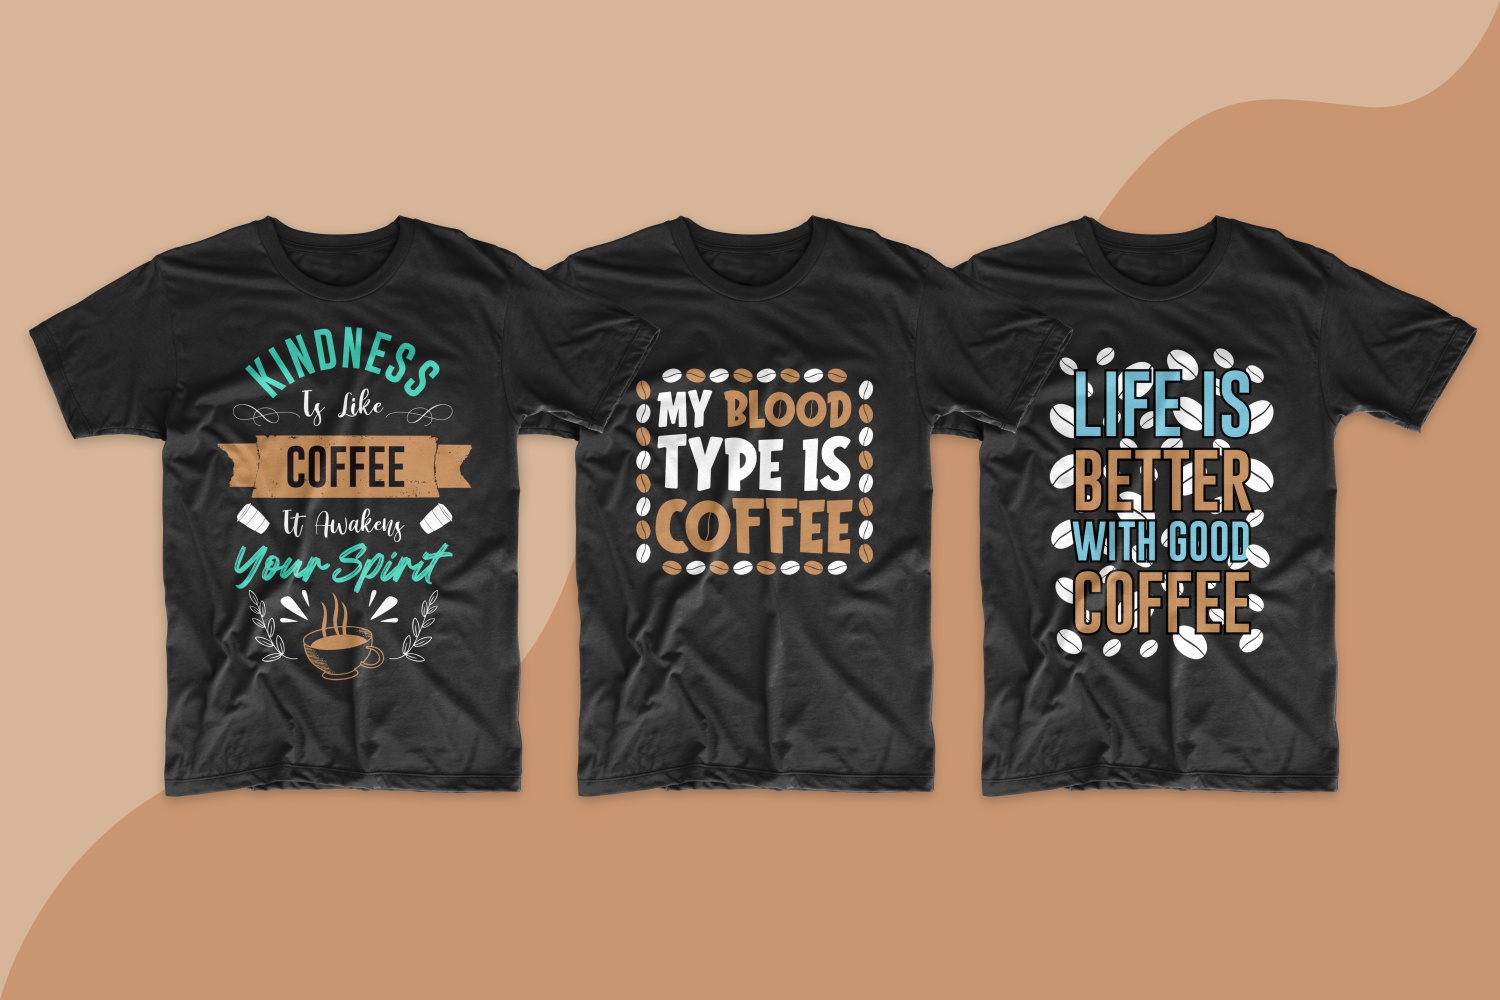 Classic men's T-shirts in dark color with red beans and funny coffee lovers' slogans.